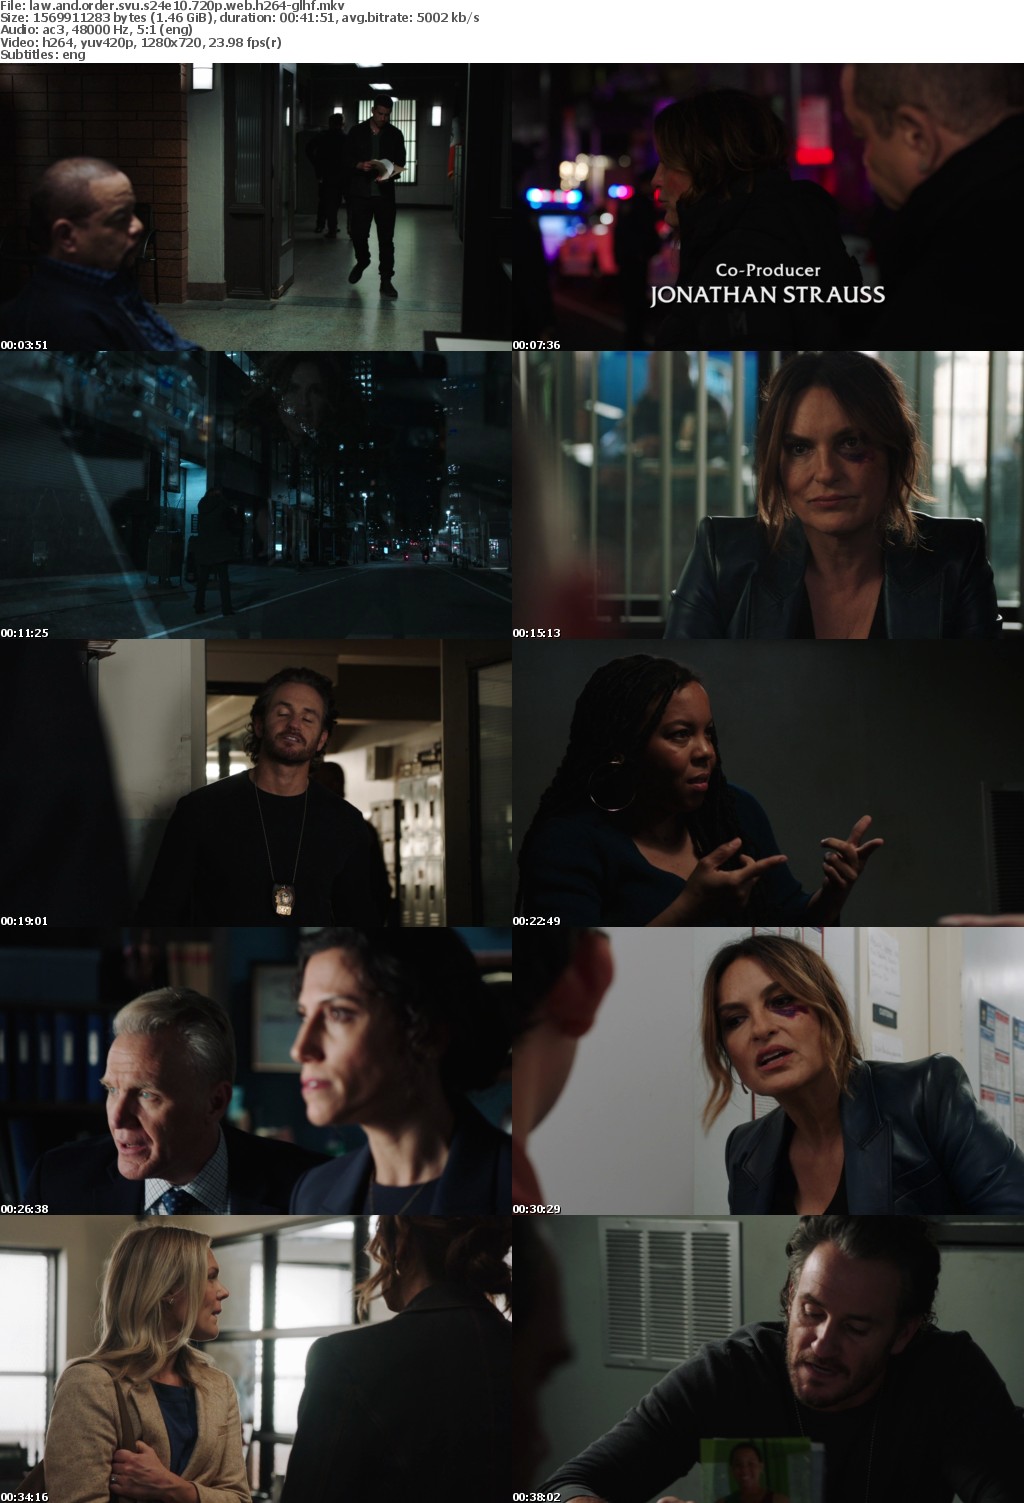 Law and Order SVU S24E10 720p WEB H264-GLHF